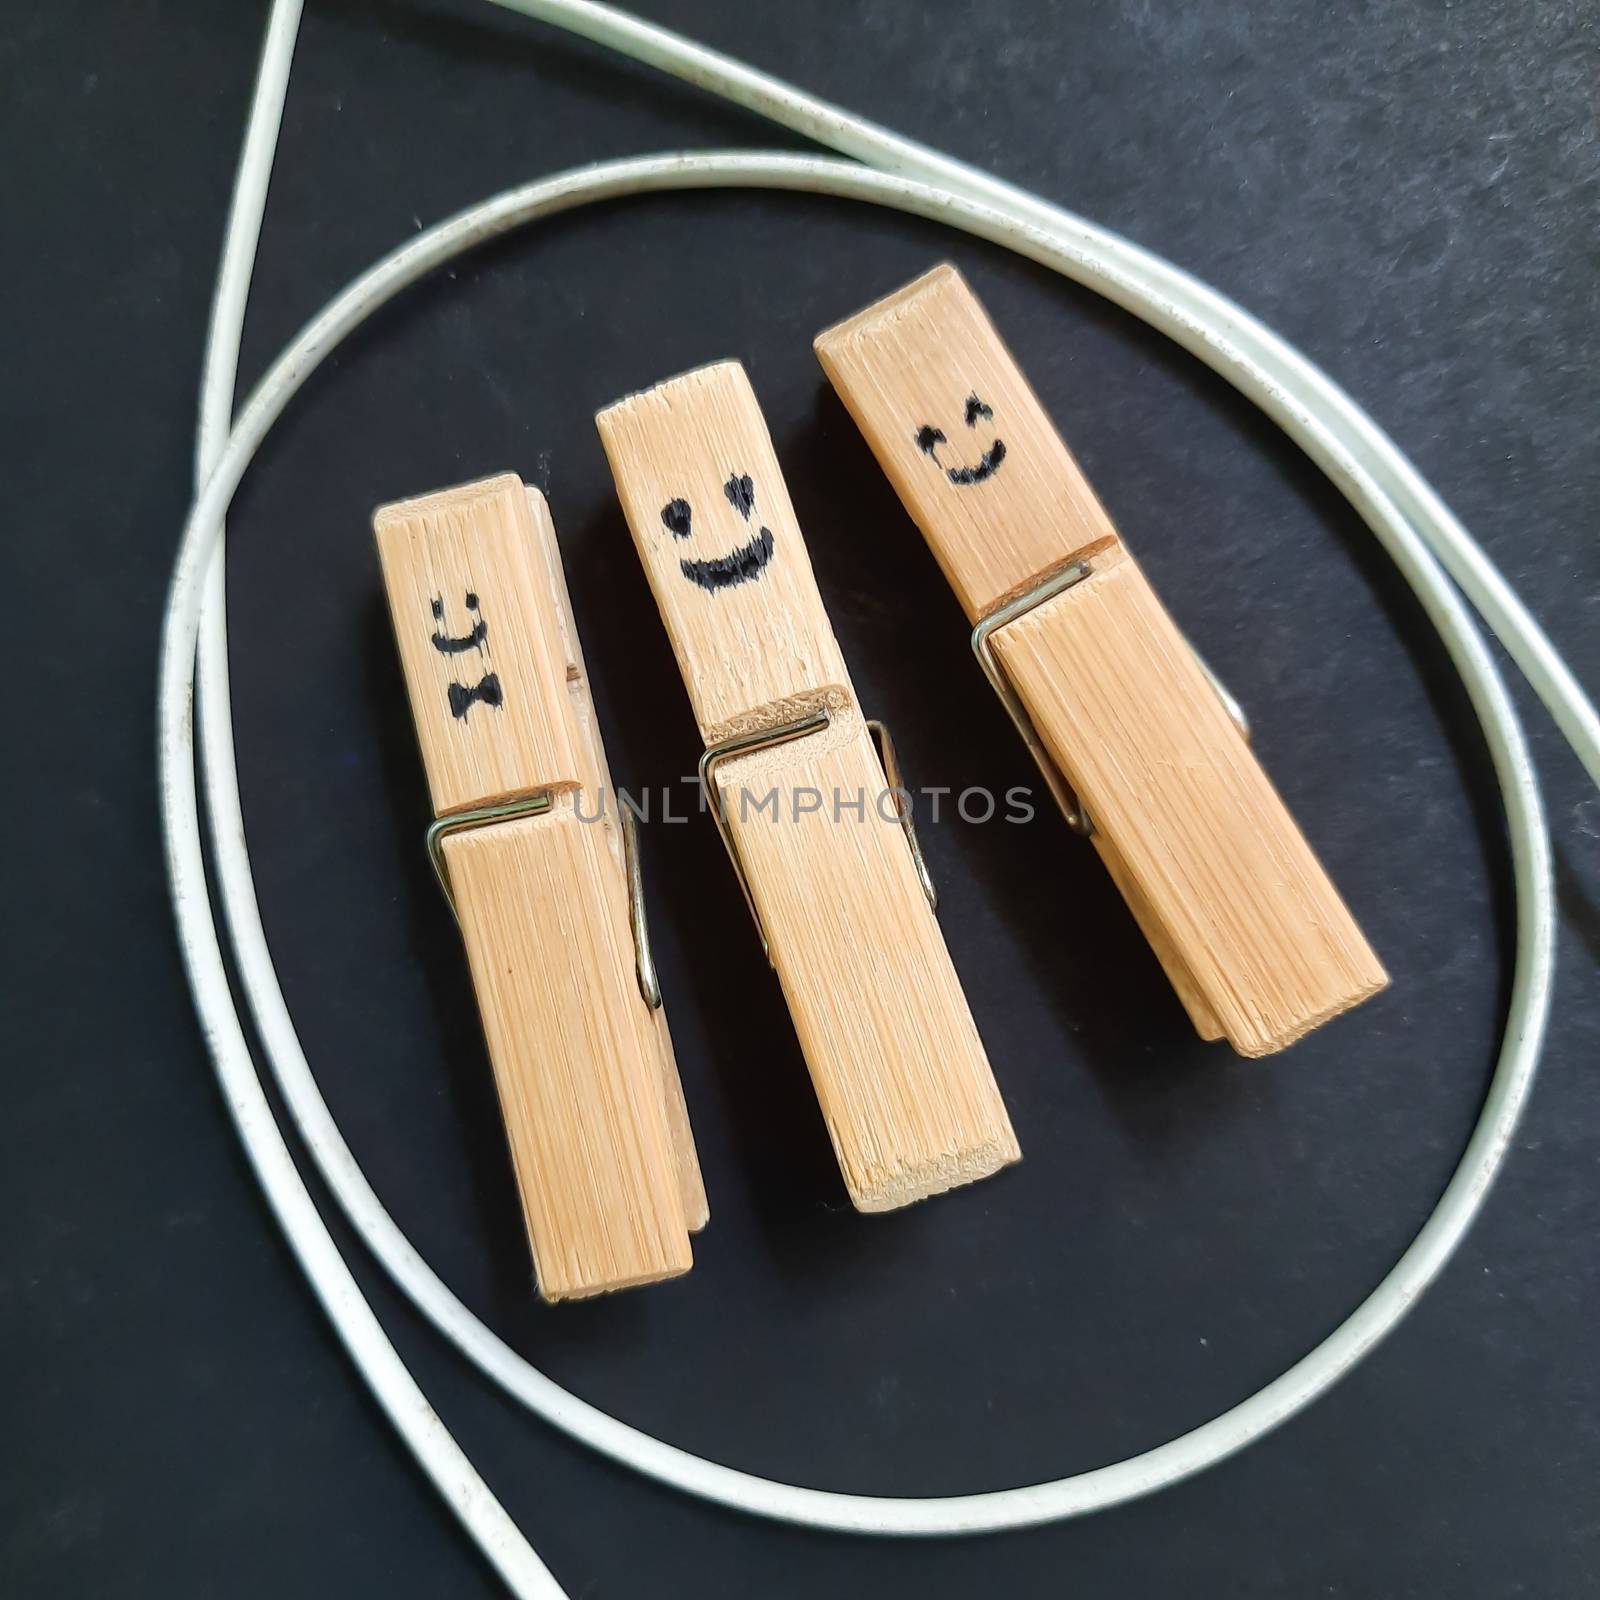 Smileys picture drawn in Hanging clip placed with wire in black paper for backgrounds and template to use